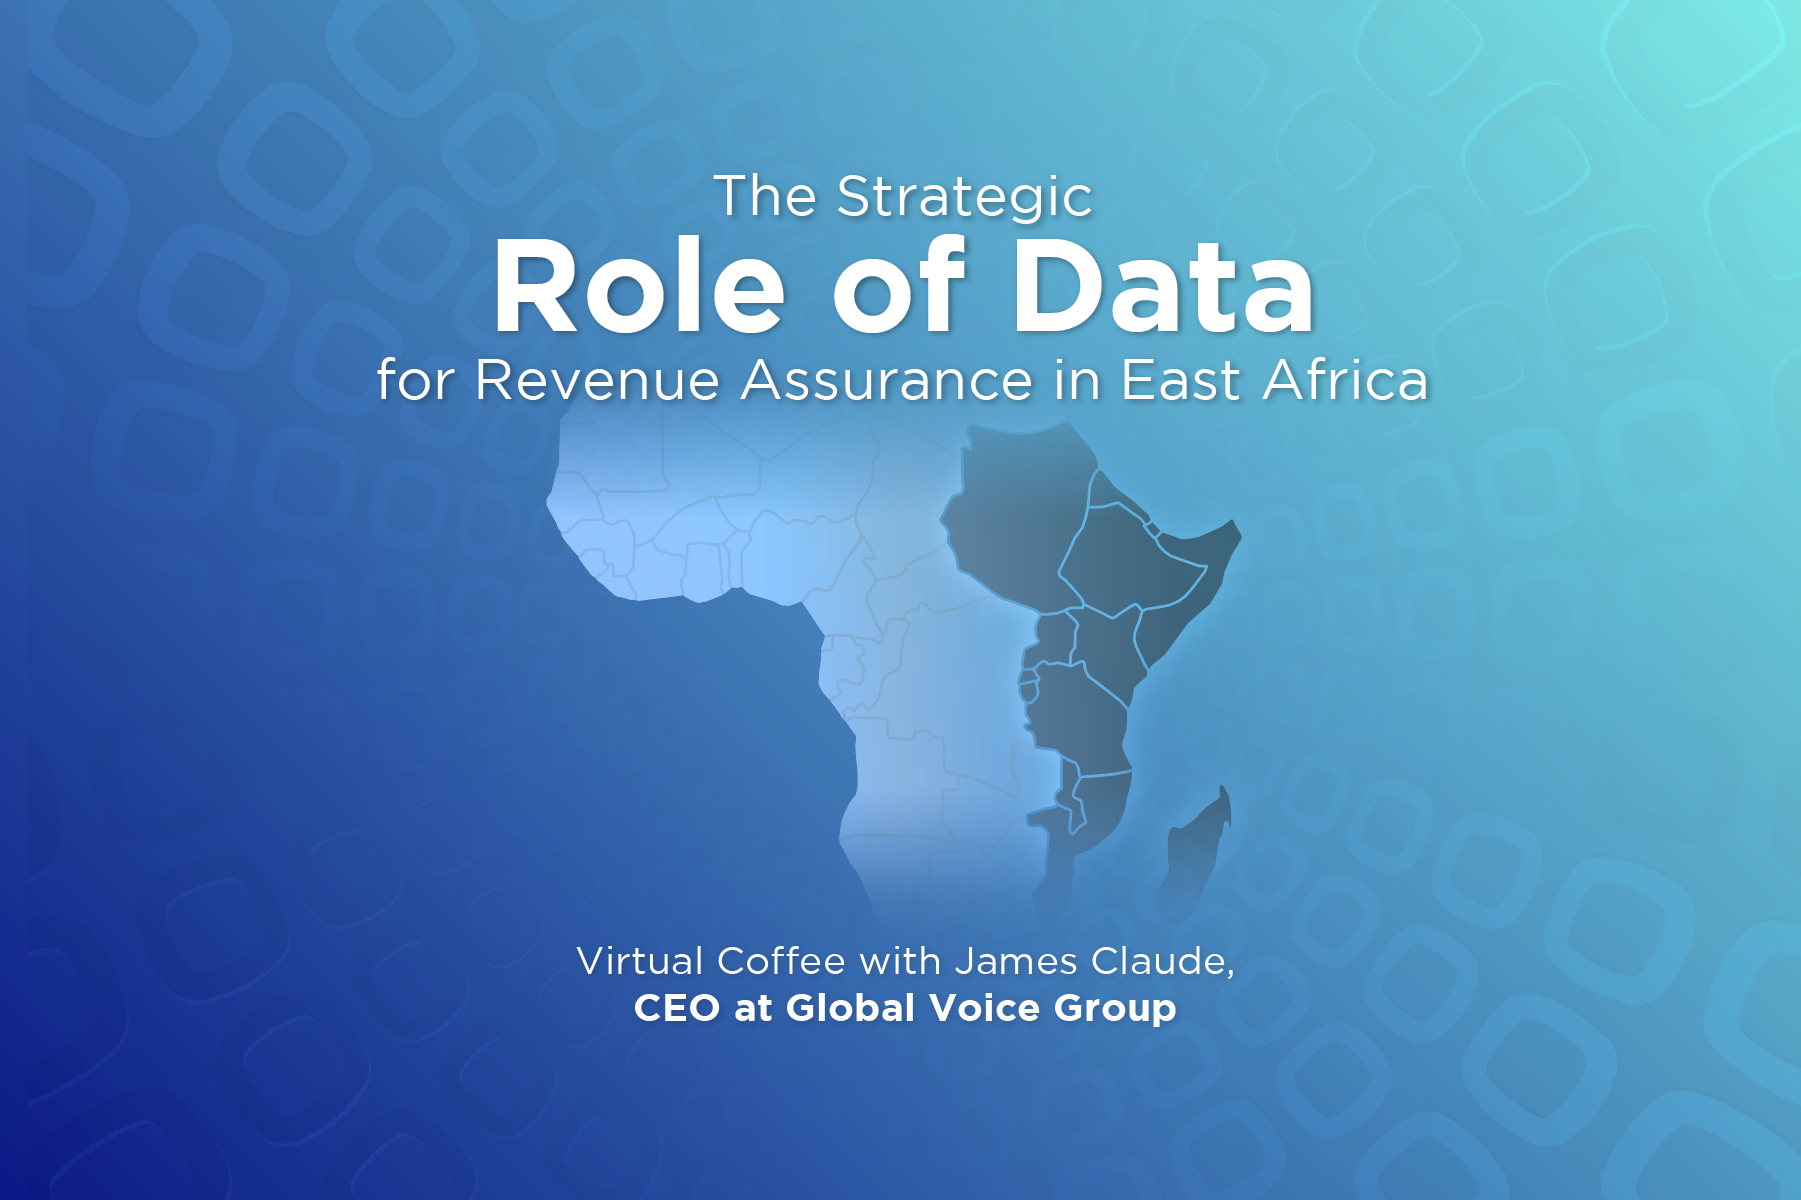 Virtual Coffee With James Claude, January 2021: The Strategic Role Of Data For Revenue Assurance In East Africa